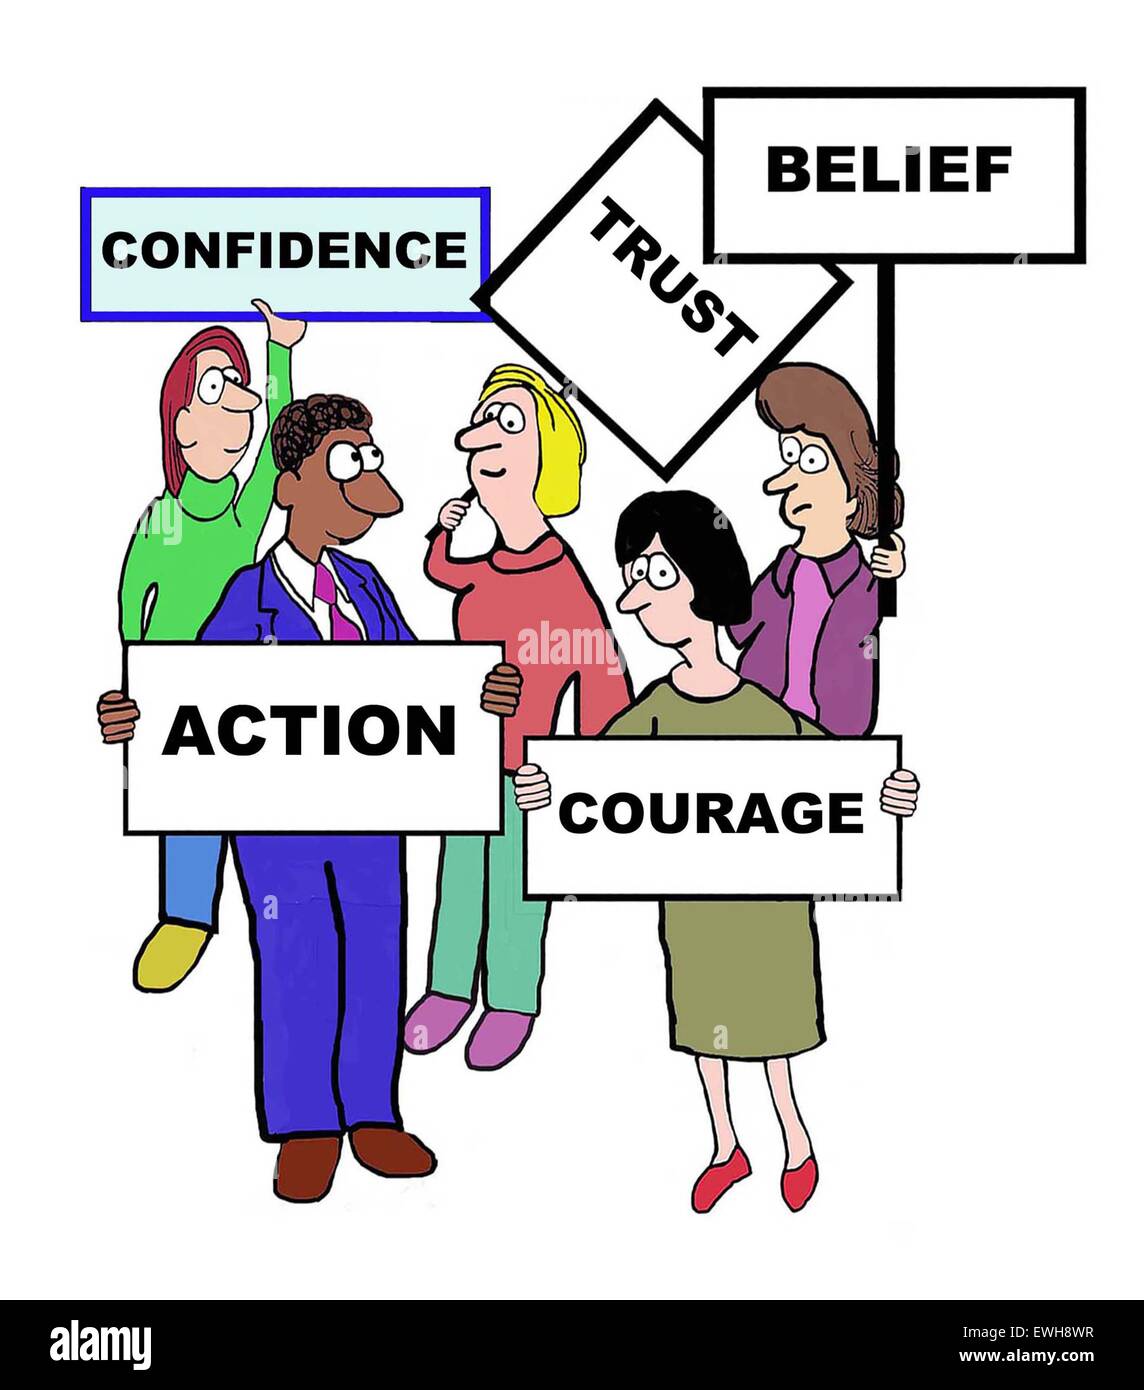 Business cartoon of businesspeople holding signs on 'confidence: trust, belief, courage, action'. Stock Photo